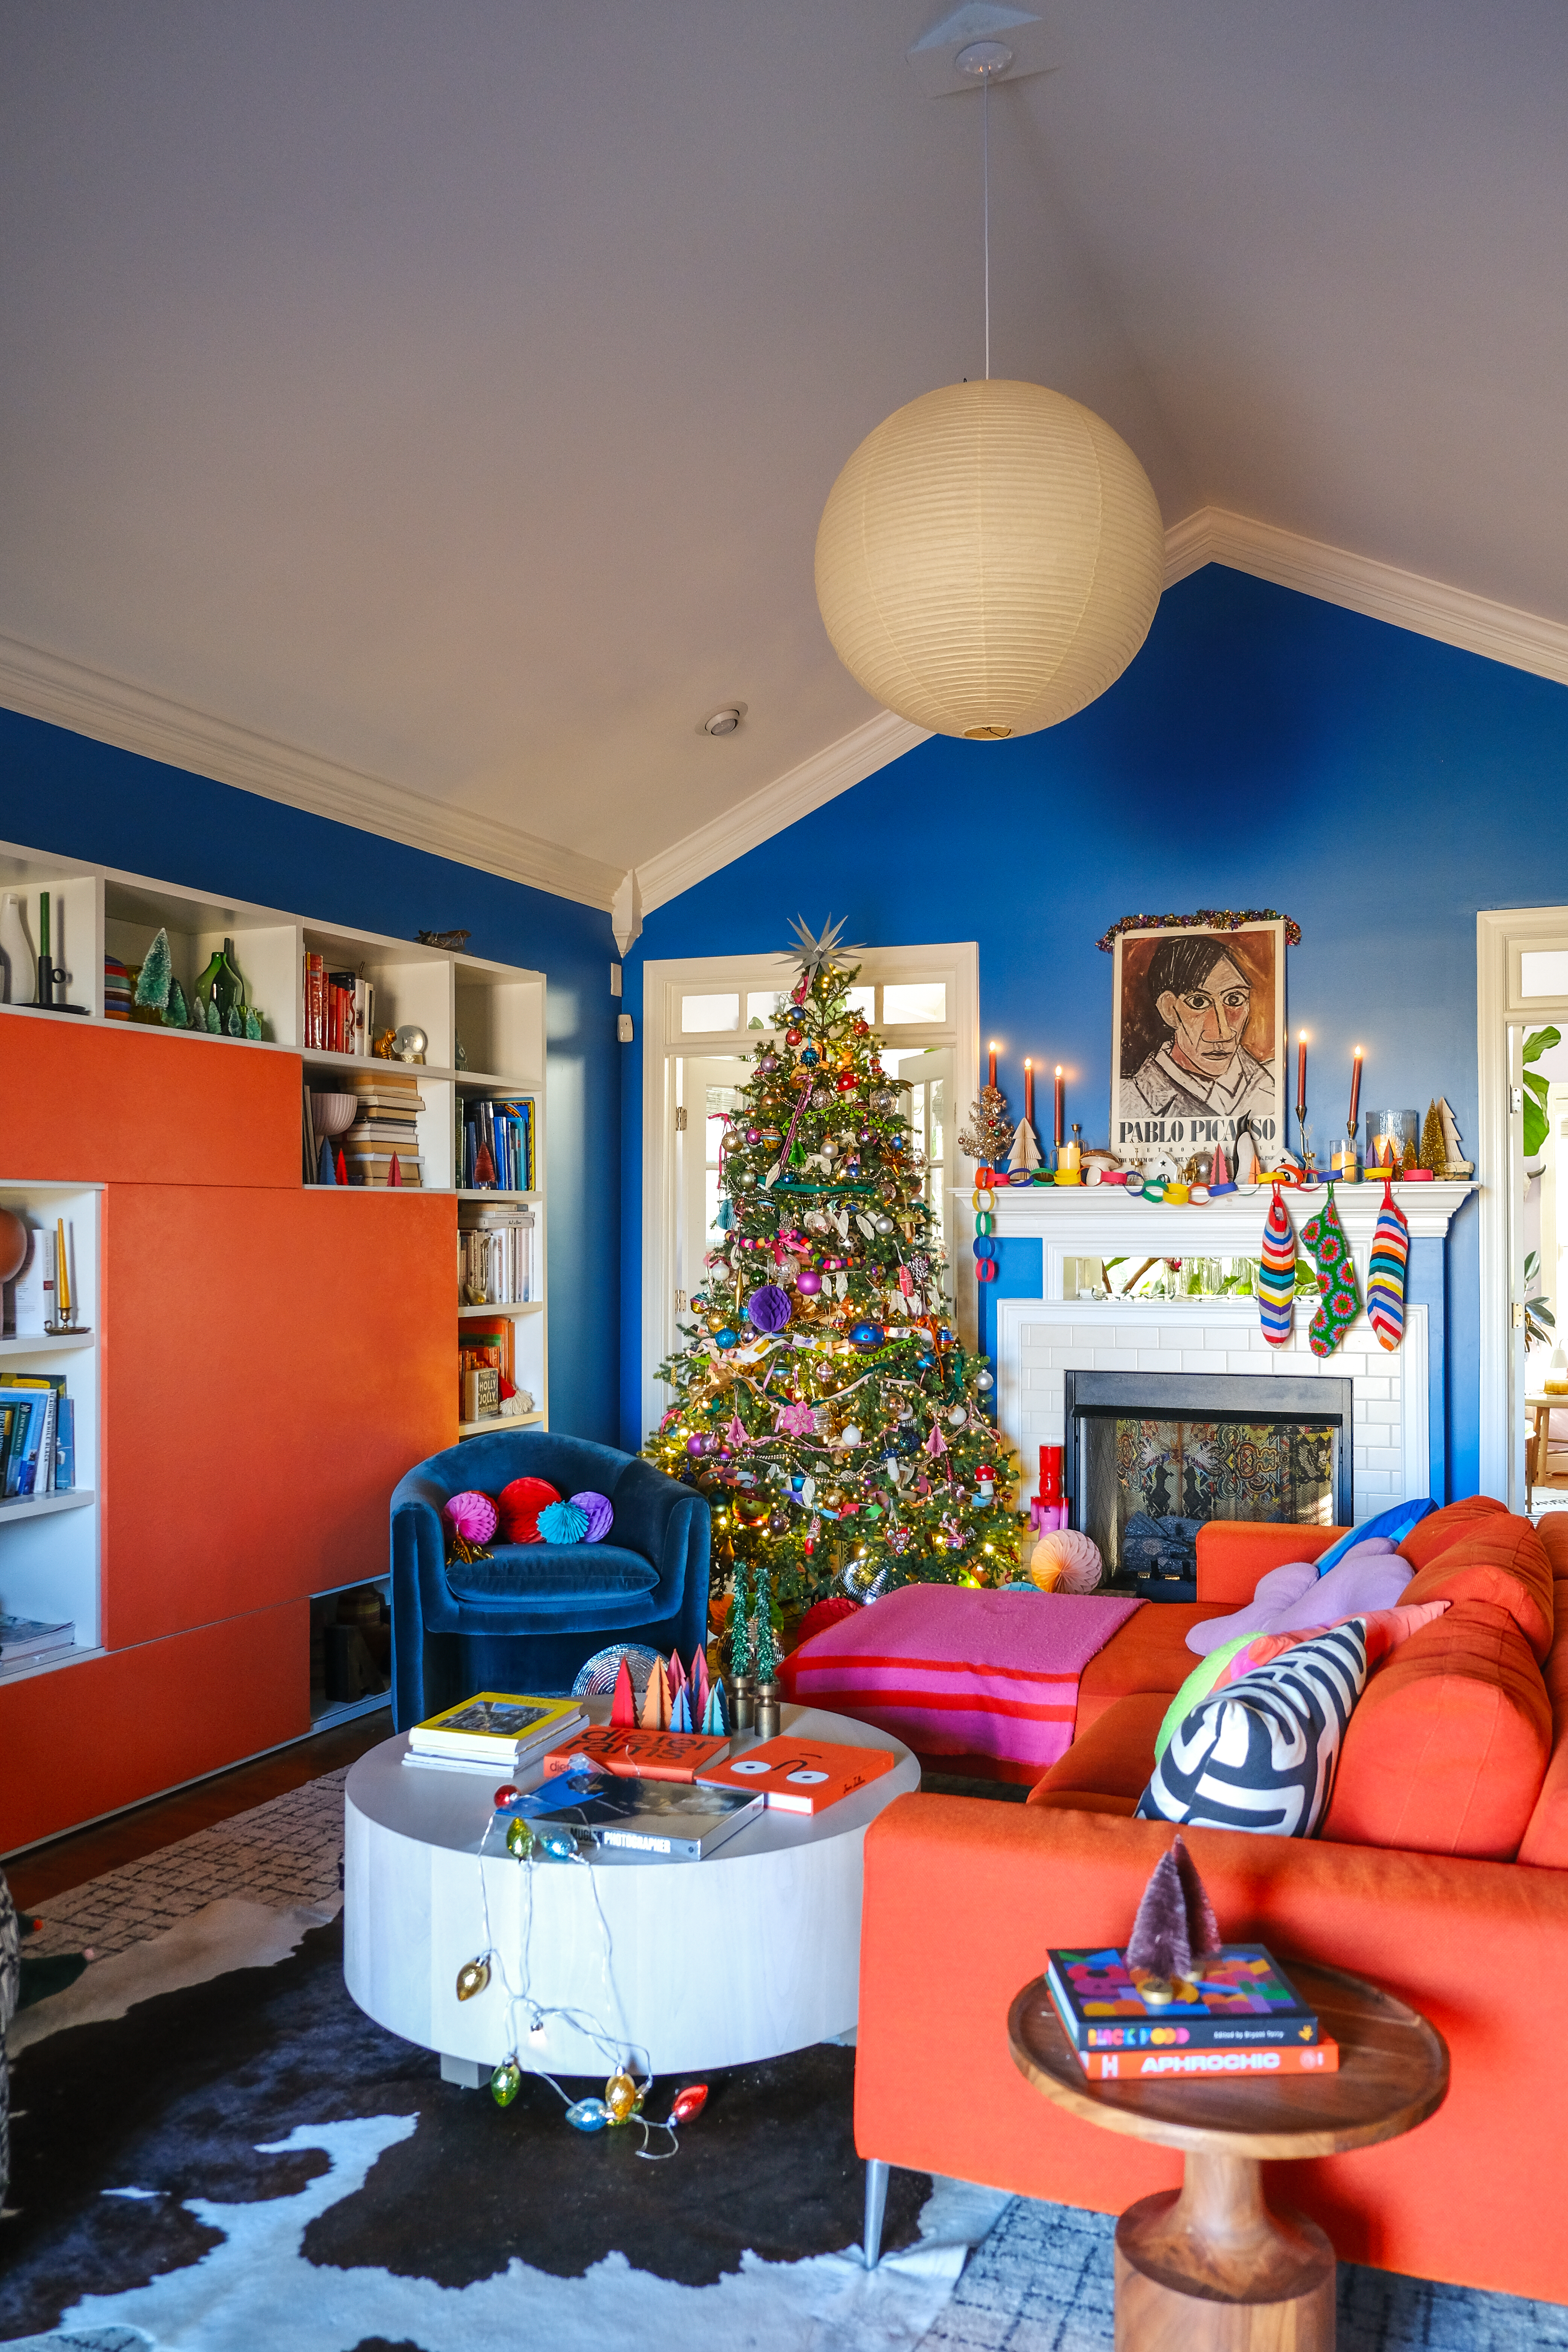 Living room decorated with colorful Christmas decor